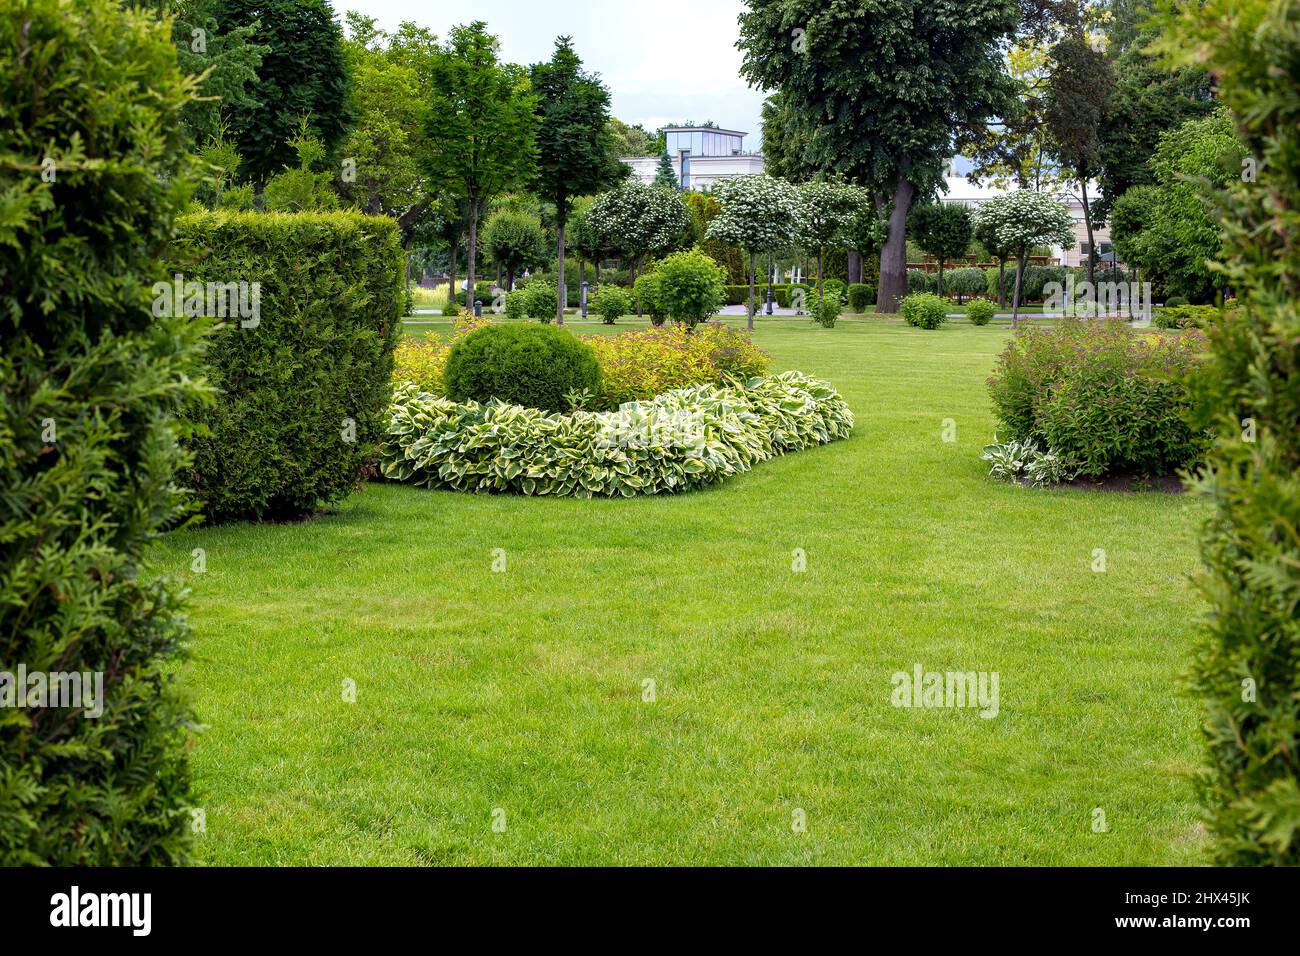 landscape design of park with garden bed and trees with leaves and green lawn, evergreen and seasonal plants in backyard with meadow space. Stock Photo